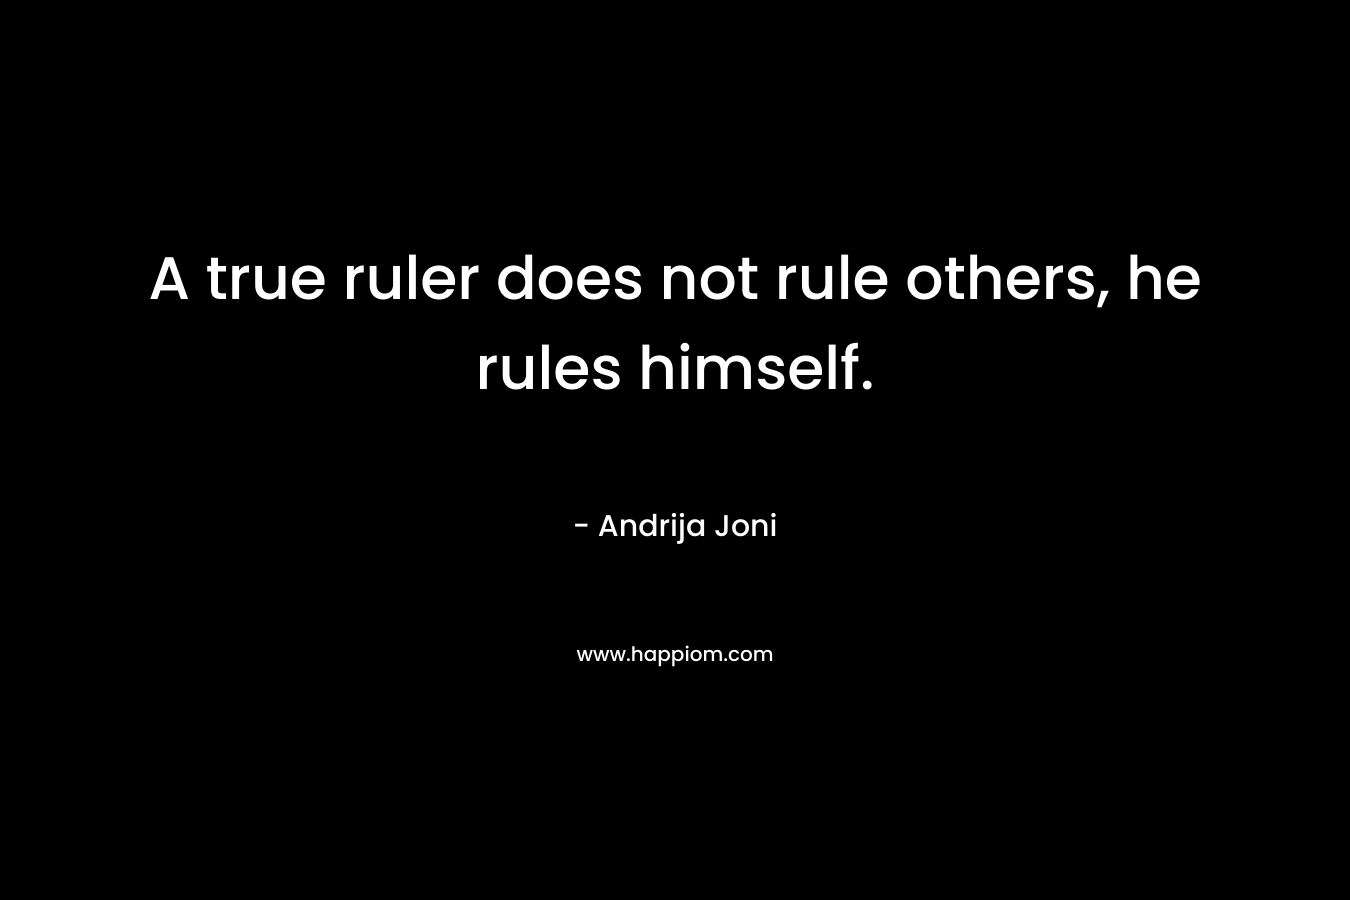 A true ruler does not rule others, he rules himself.